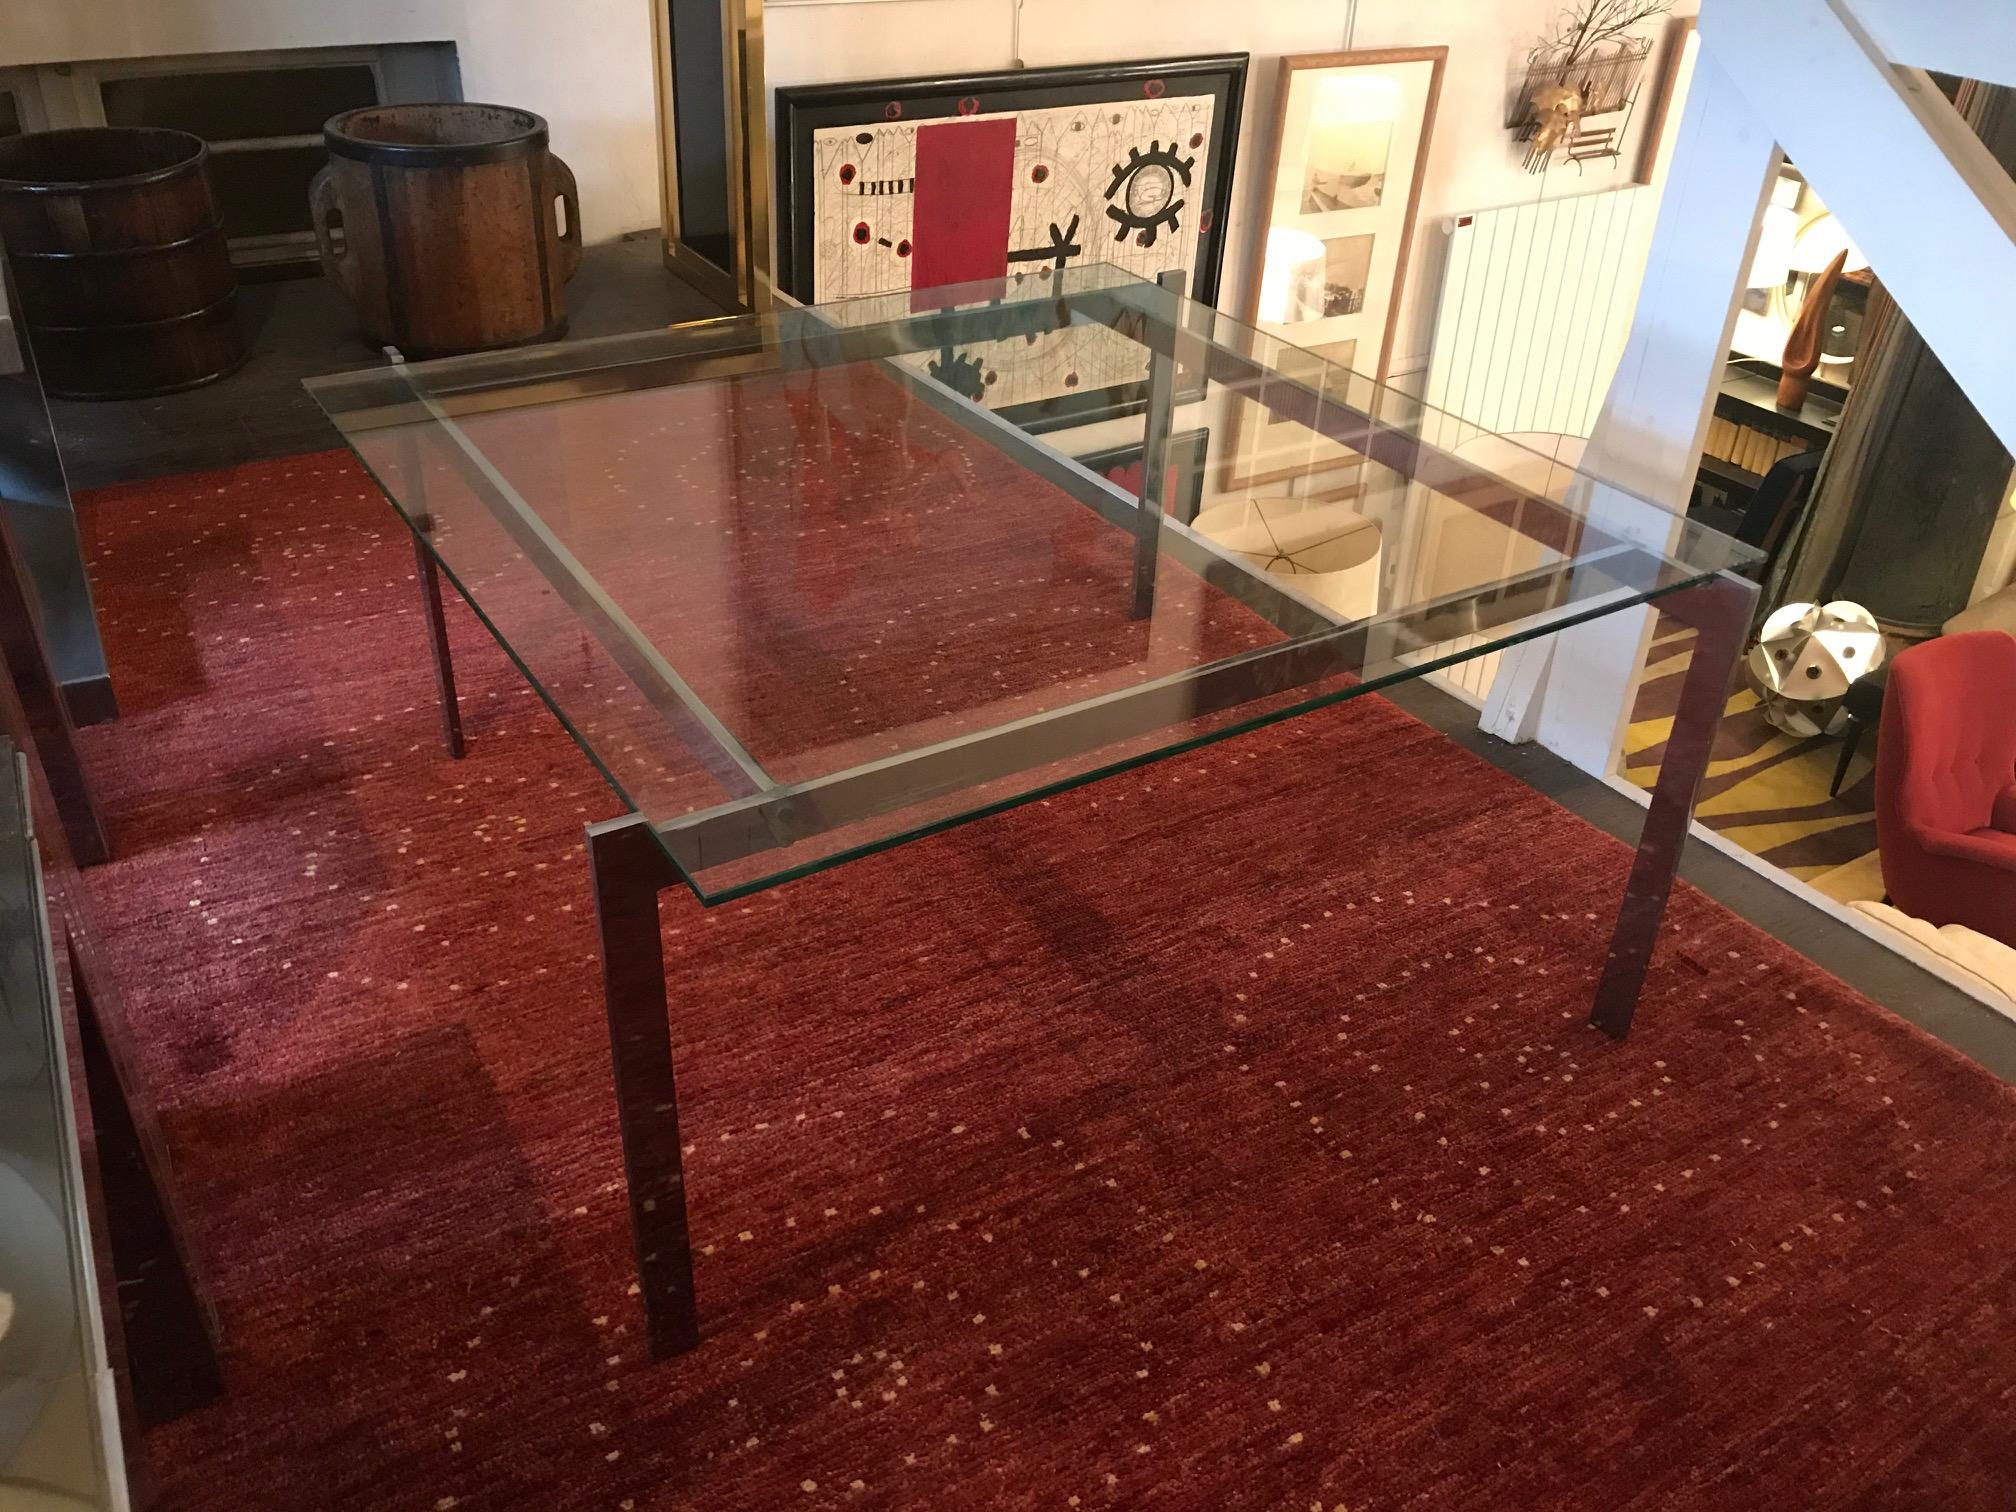 Poul Kjaerholm (1929–1980)

Coffee table designed by Poul Kjaerhlom and executed by E. Kold Christensen, Denmark

Date of manufacture 1957.